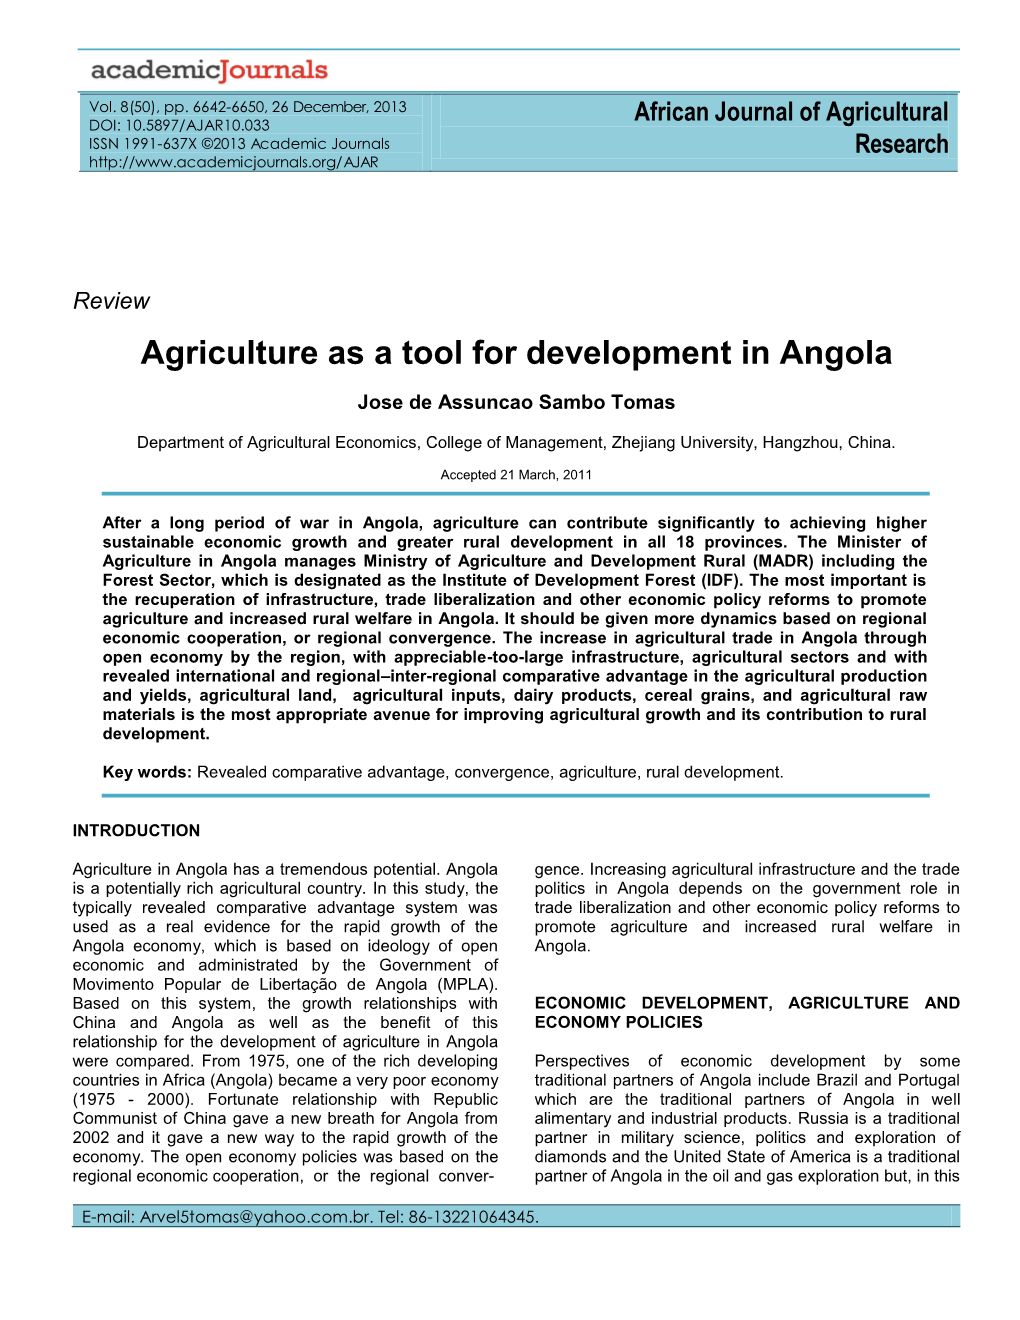 Agriculture As a Tool for Development in Angola